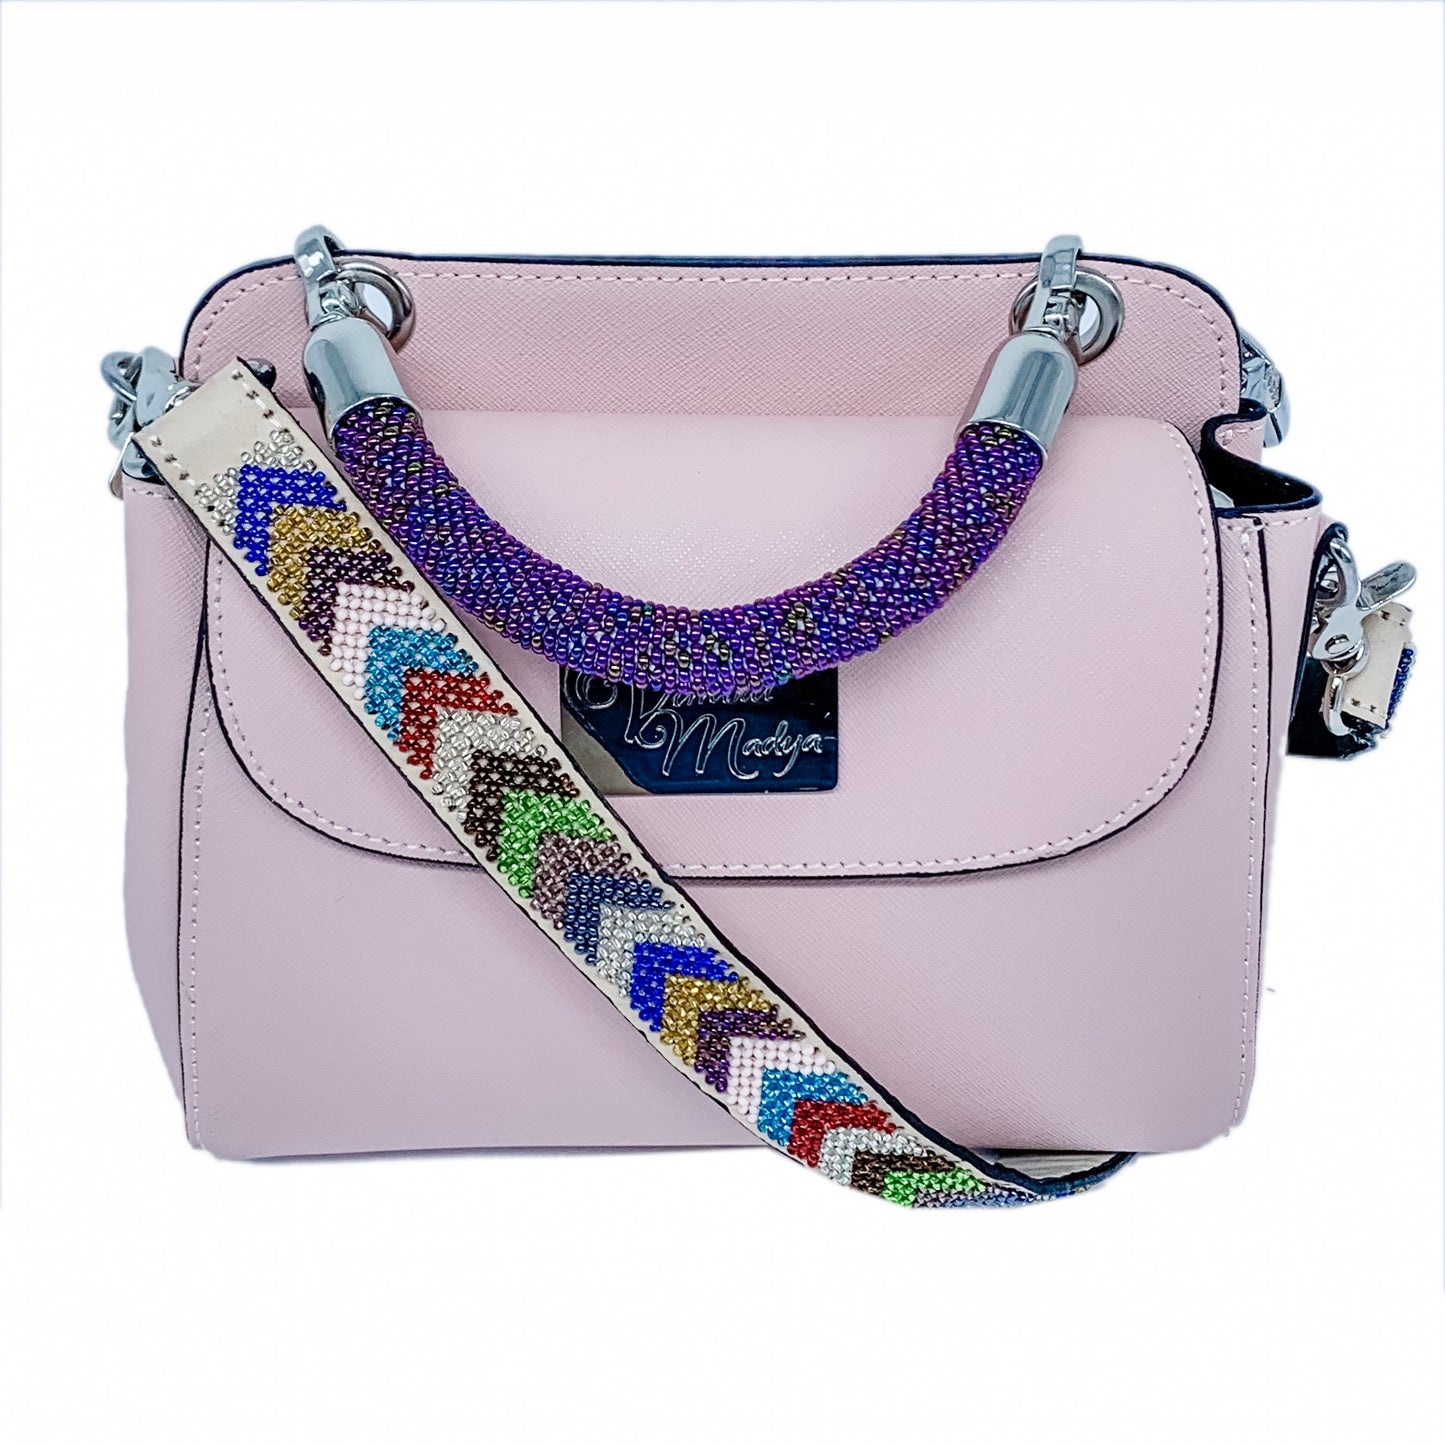 Kenya Mini Leather Bag with interchangeable set of straps and handles